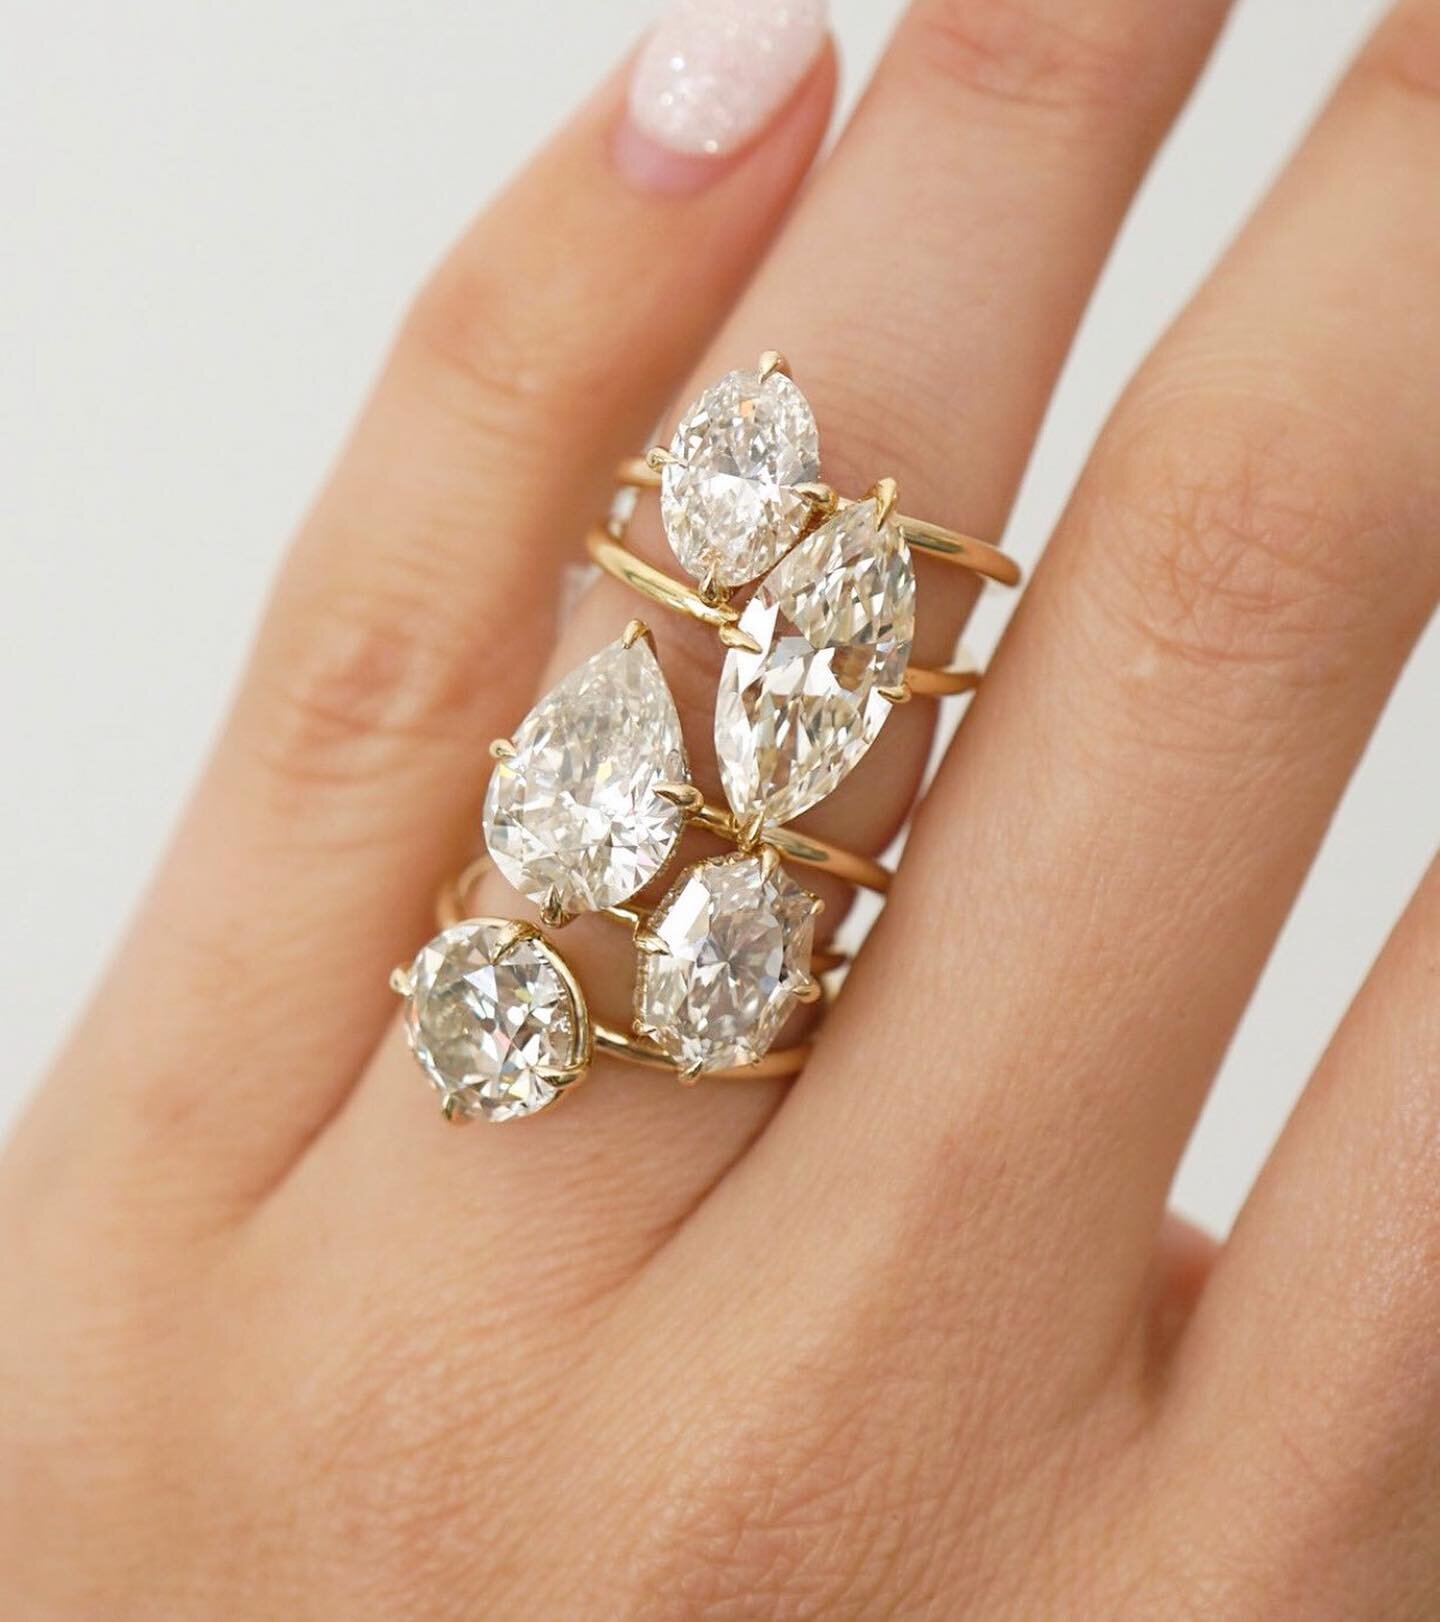 We&rsquo;re drooling over these @sofiakaman rings!✨ What is your favourite stone shape?!